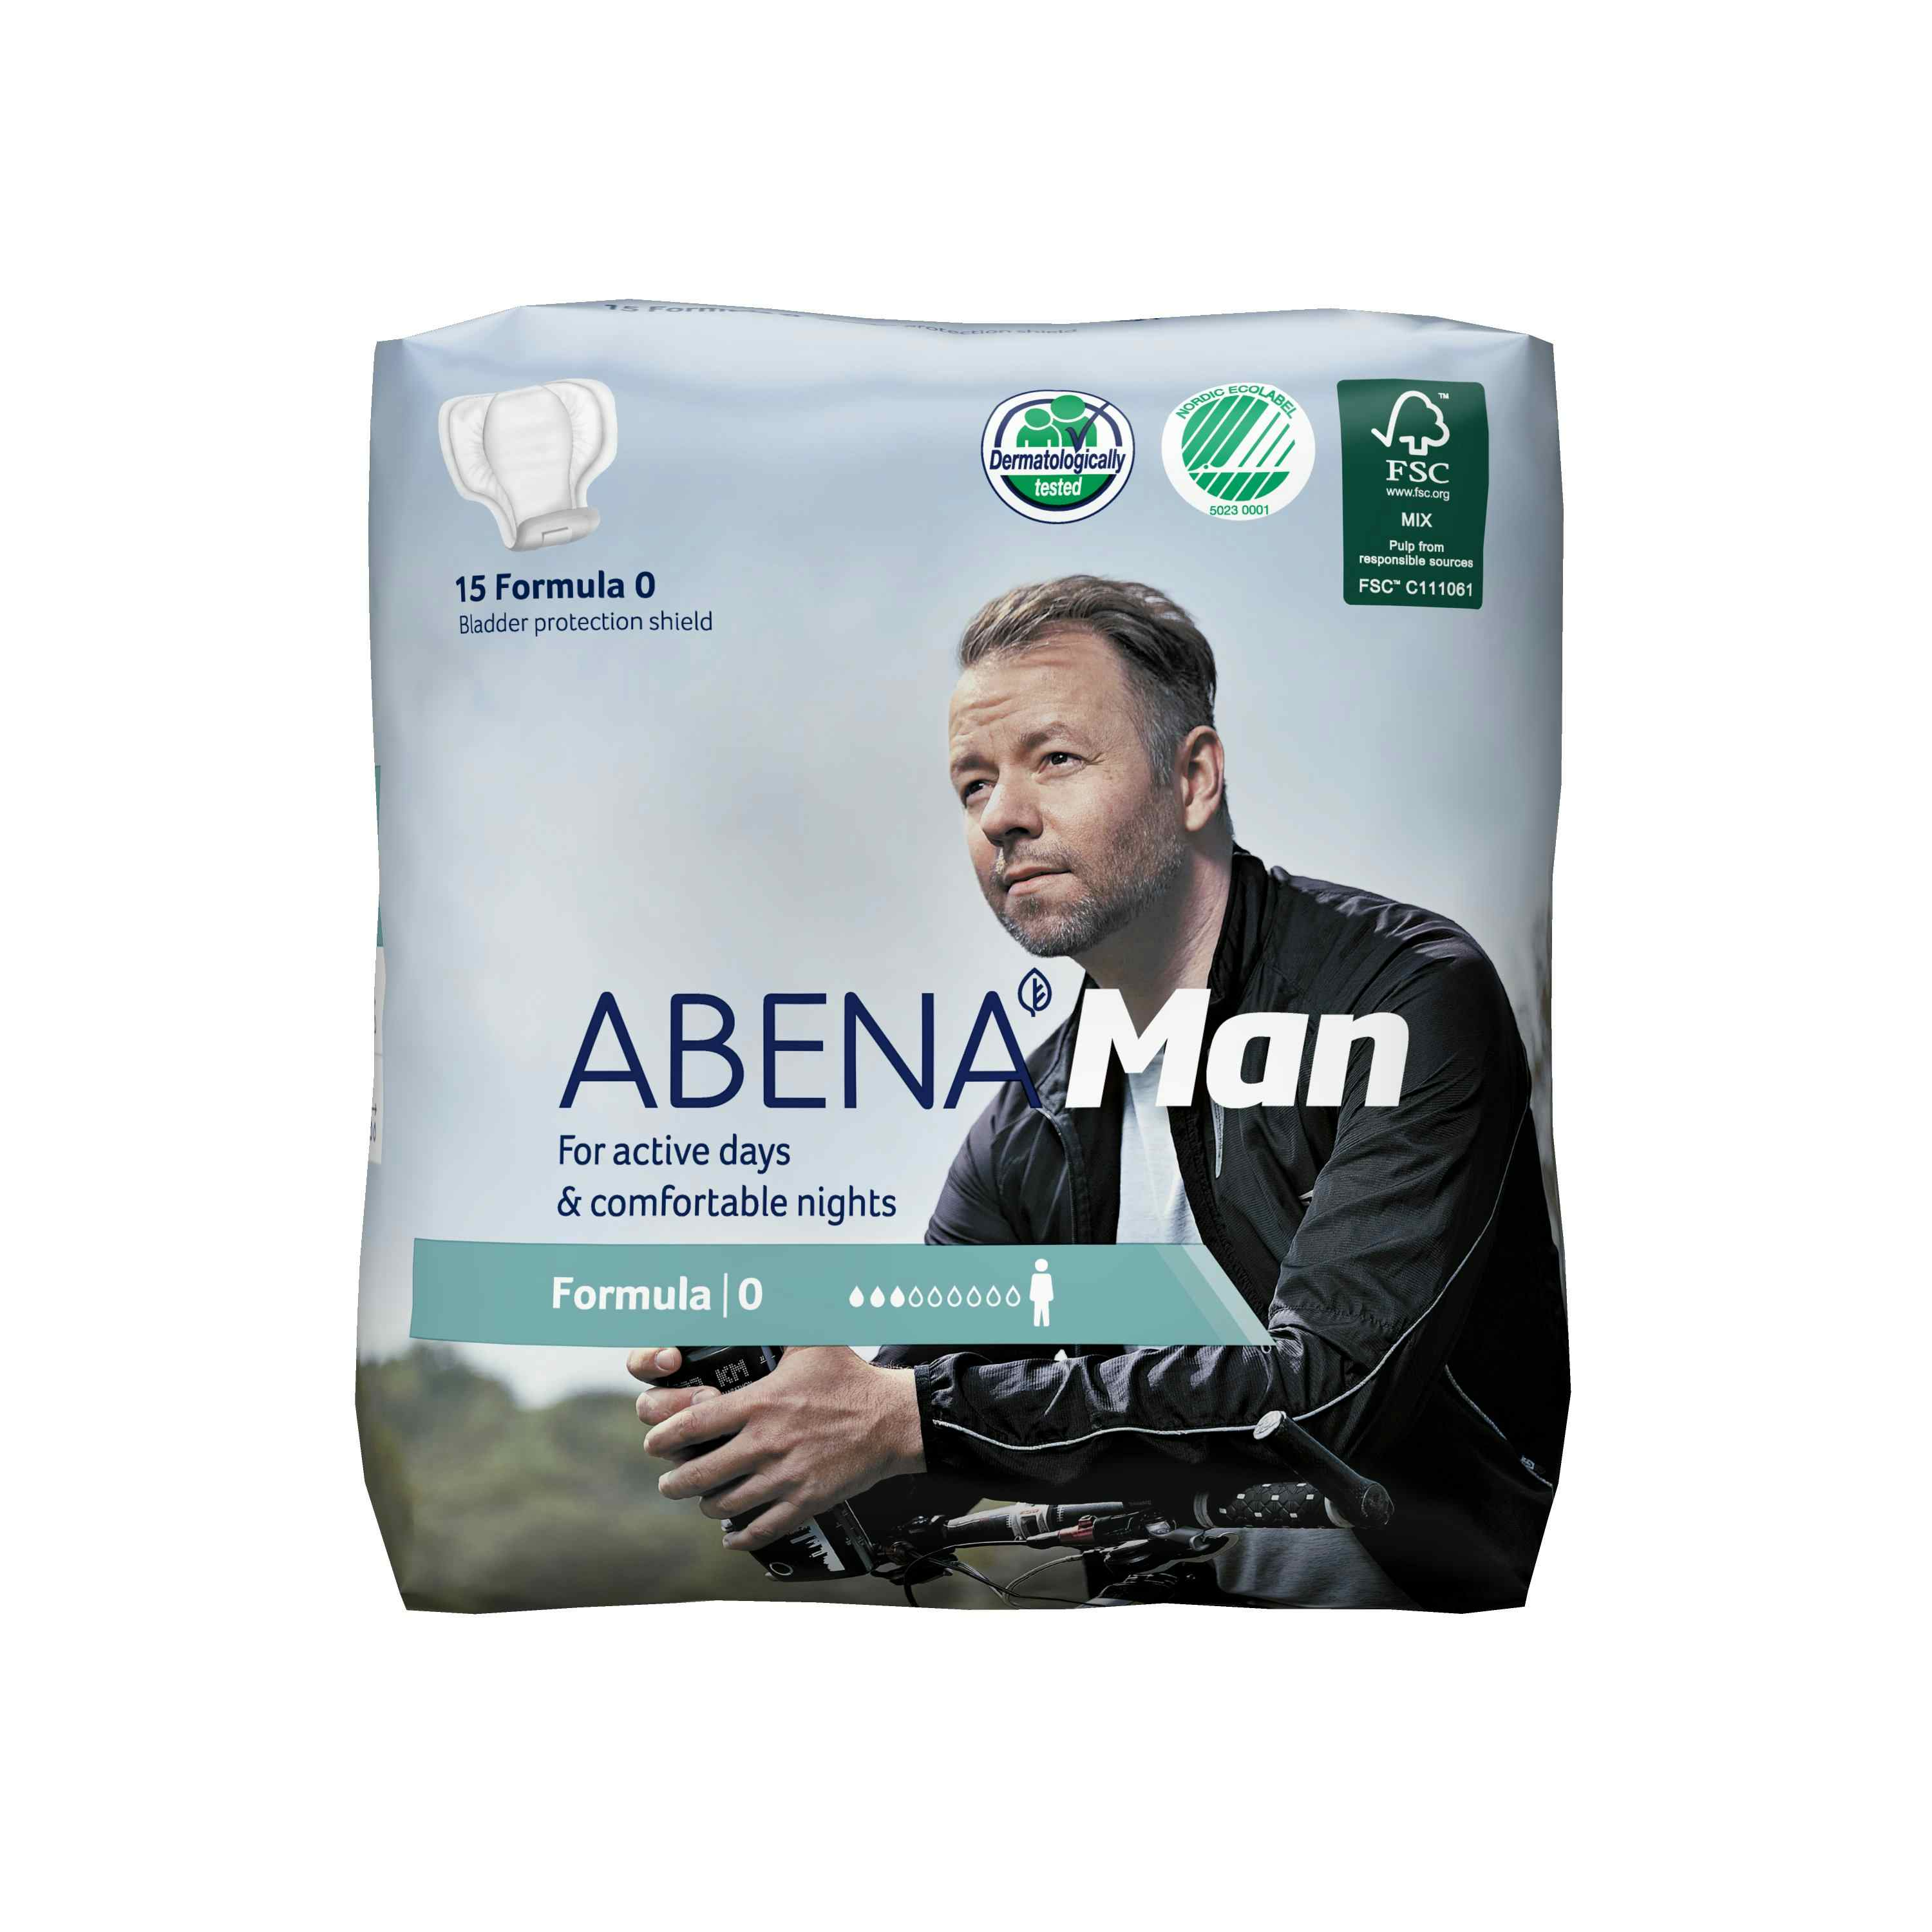  Abena-Man Adult Male Disposable Bladder Control Pad, Light Absorbency, 1000017161, Formula 0 (9") - Case of 240 Pads (16 Bags)